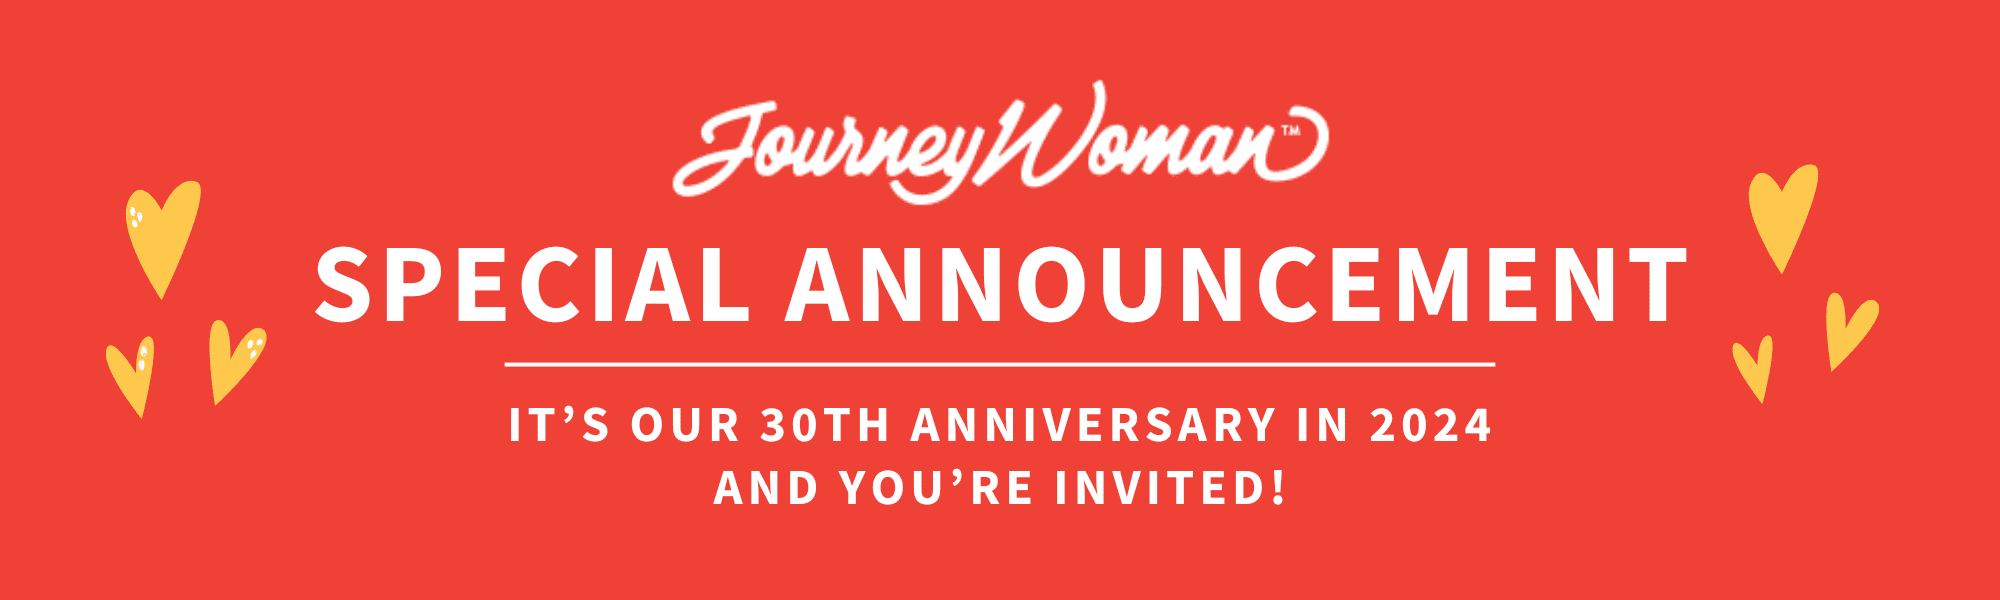 red banner announcing journeywoman special 30th anniversary 